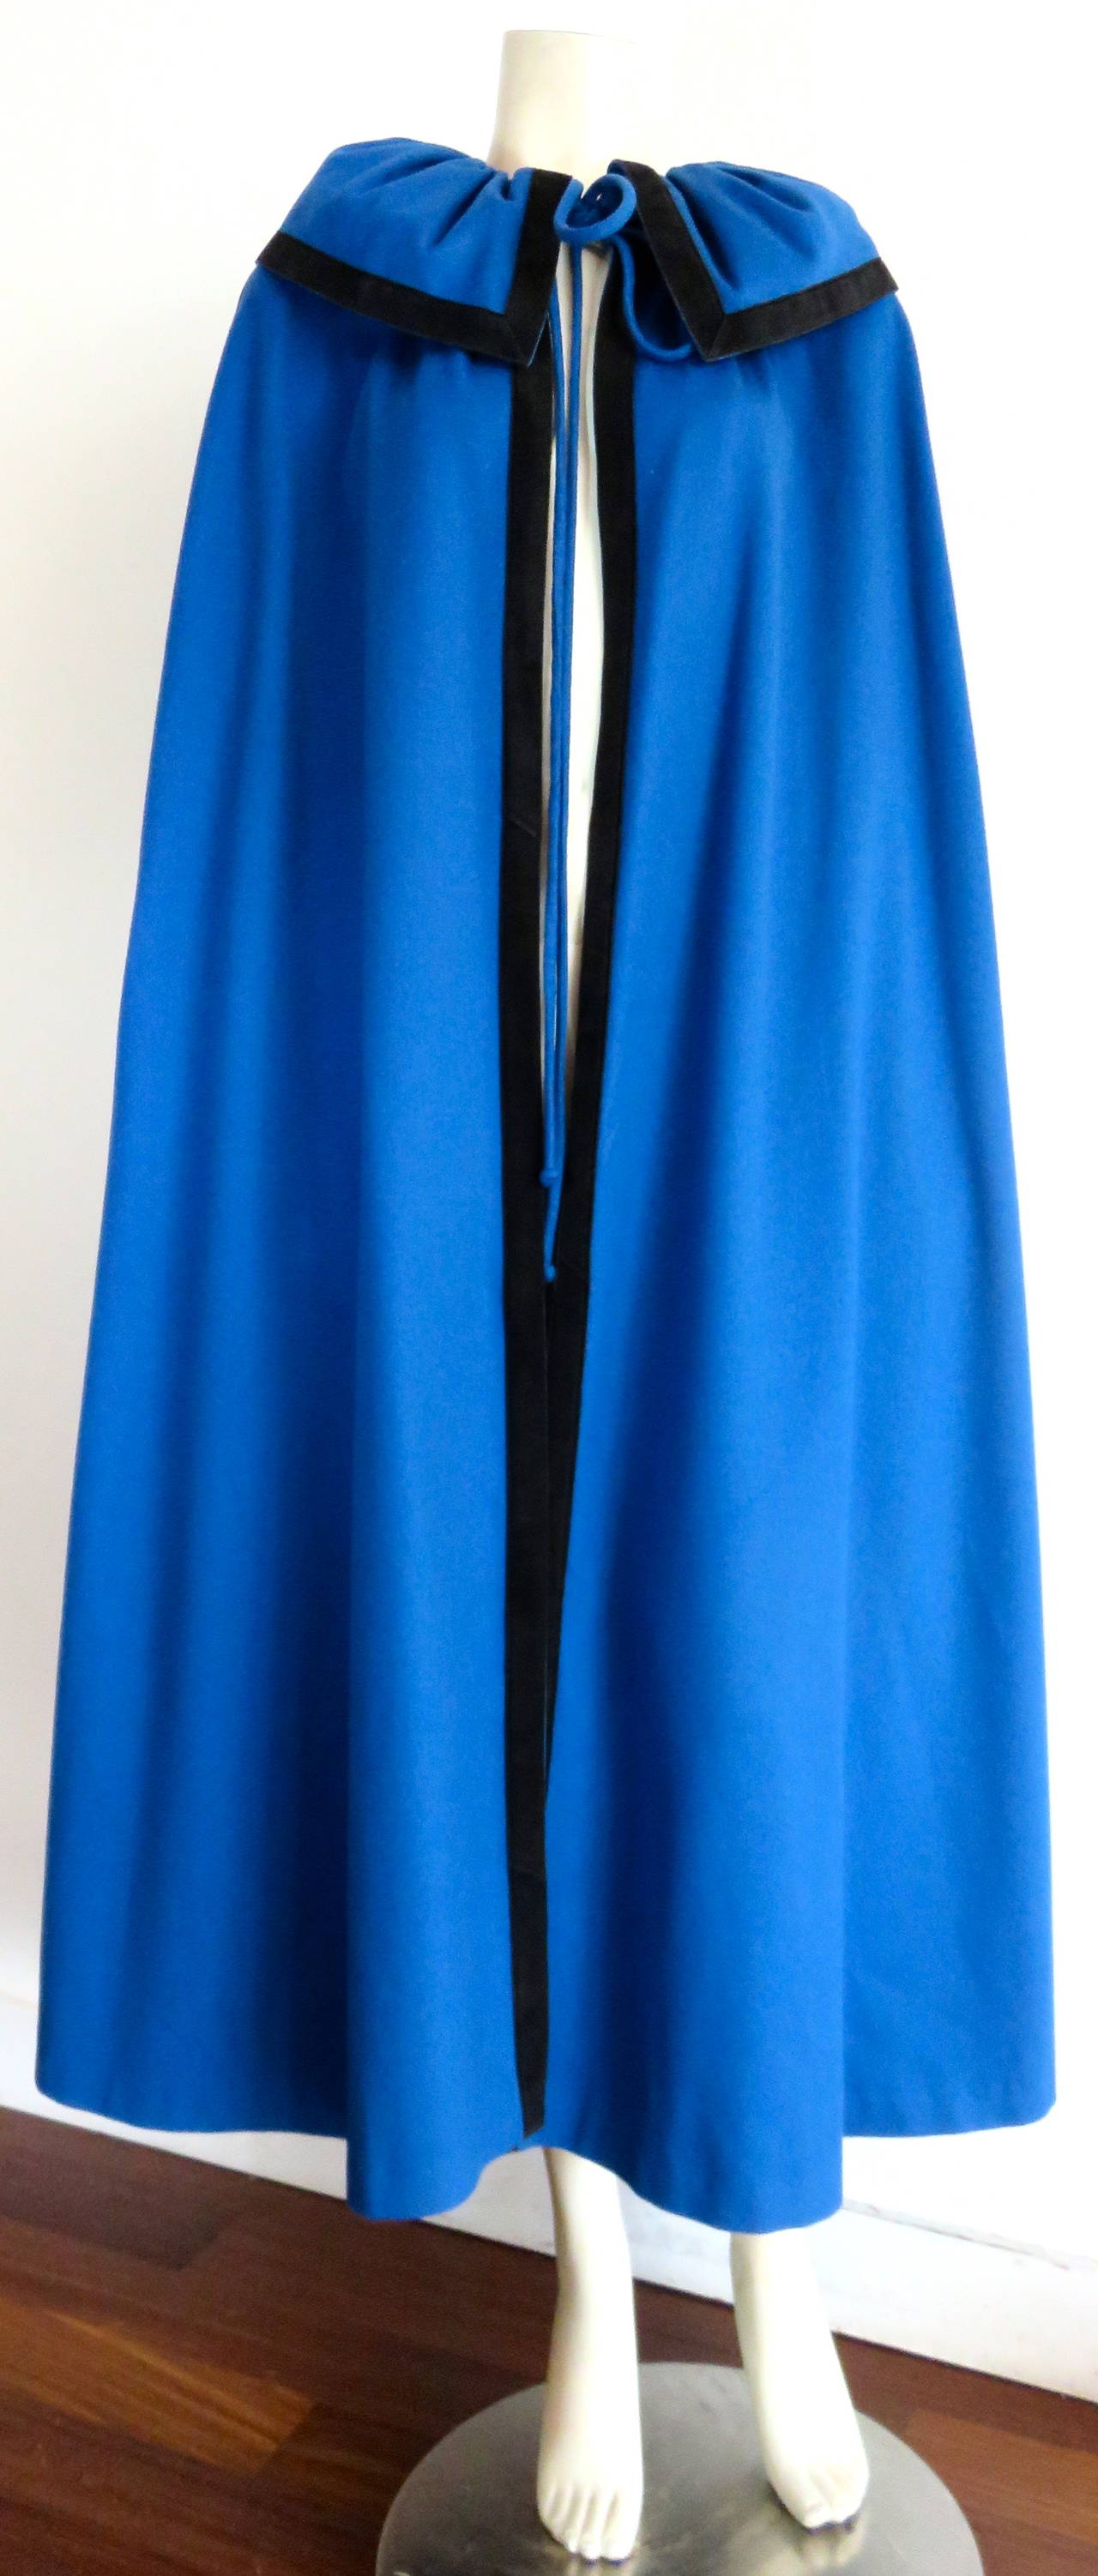 Excellent condition, early 1970's CHRISTIAN DIOR Blue wool & black suede cape.

This gorgeous cape is made of vibrant blue wool with thick, black suede skin edge binding at the collar edge, front opening edges, and sides.

Mitered suede edge